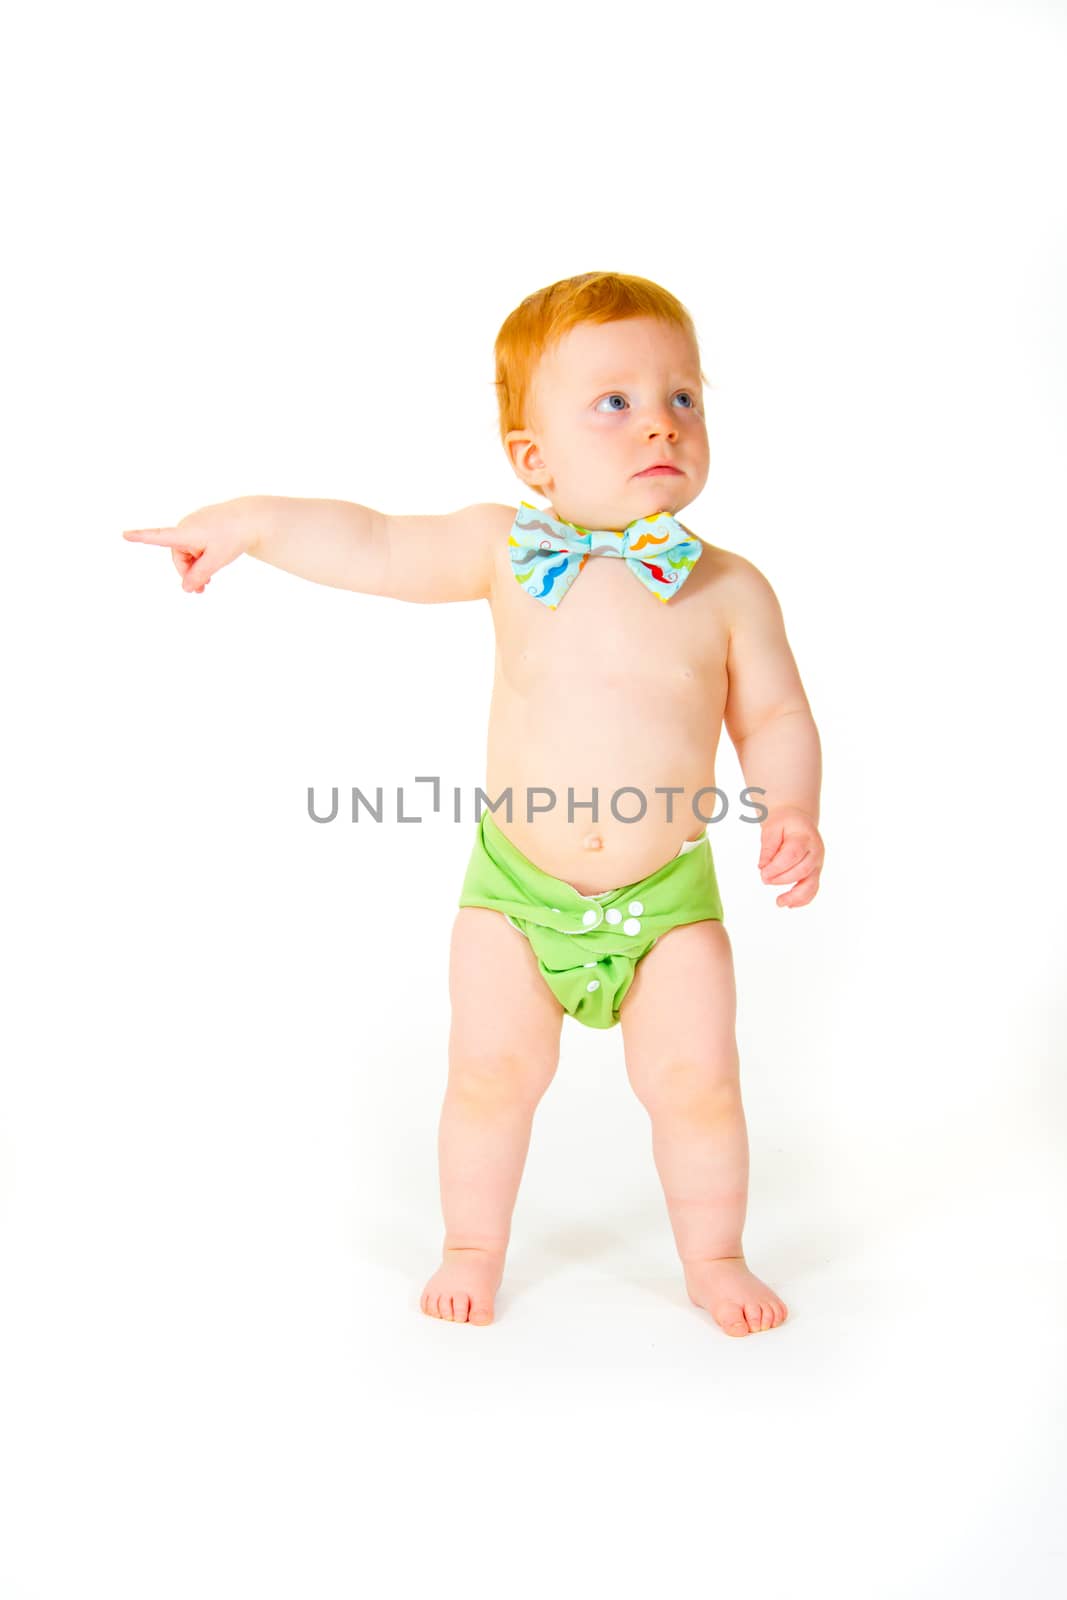 A one year old baby boy in the studio with a white background. The kid is wearing a bowtie and a diaper.